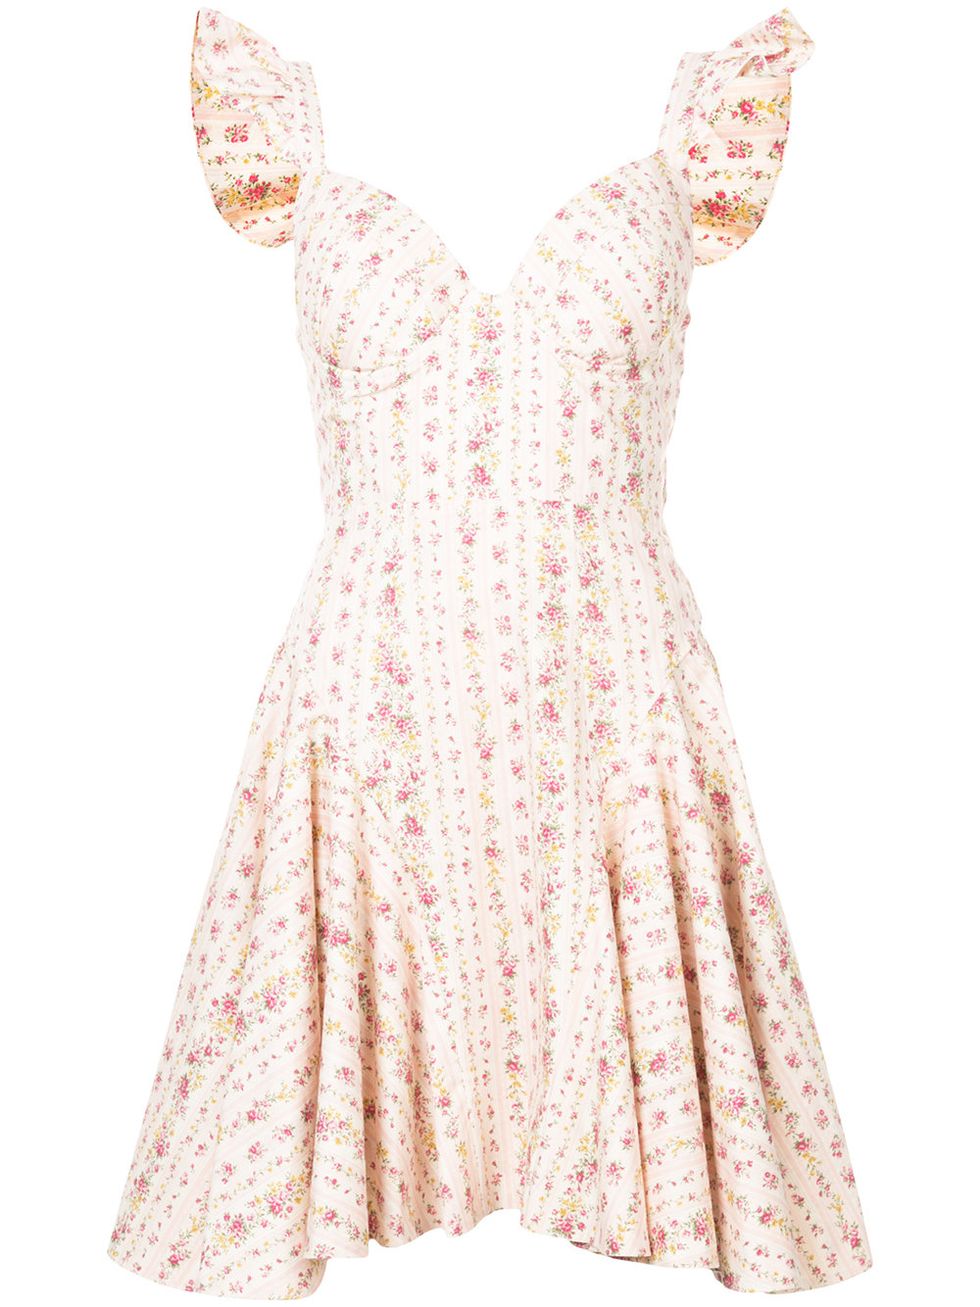 Clothing, Dress, Day dress, White, Pink, Cocktail dress, Lace, Sleeve, Peach, Gown, 